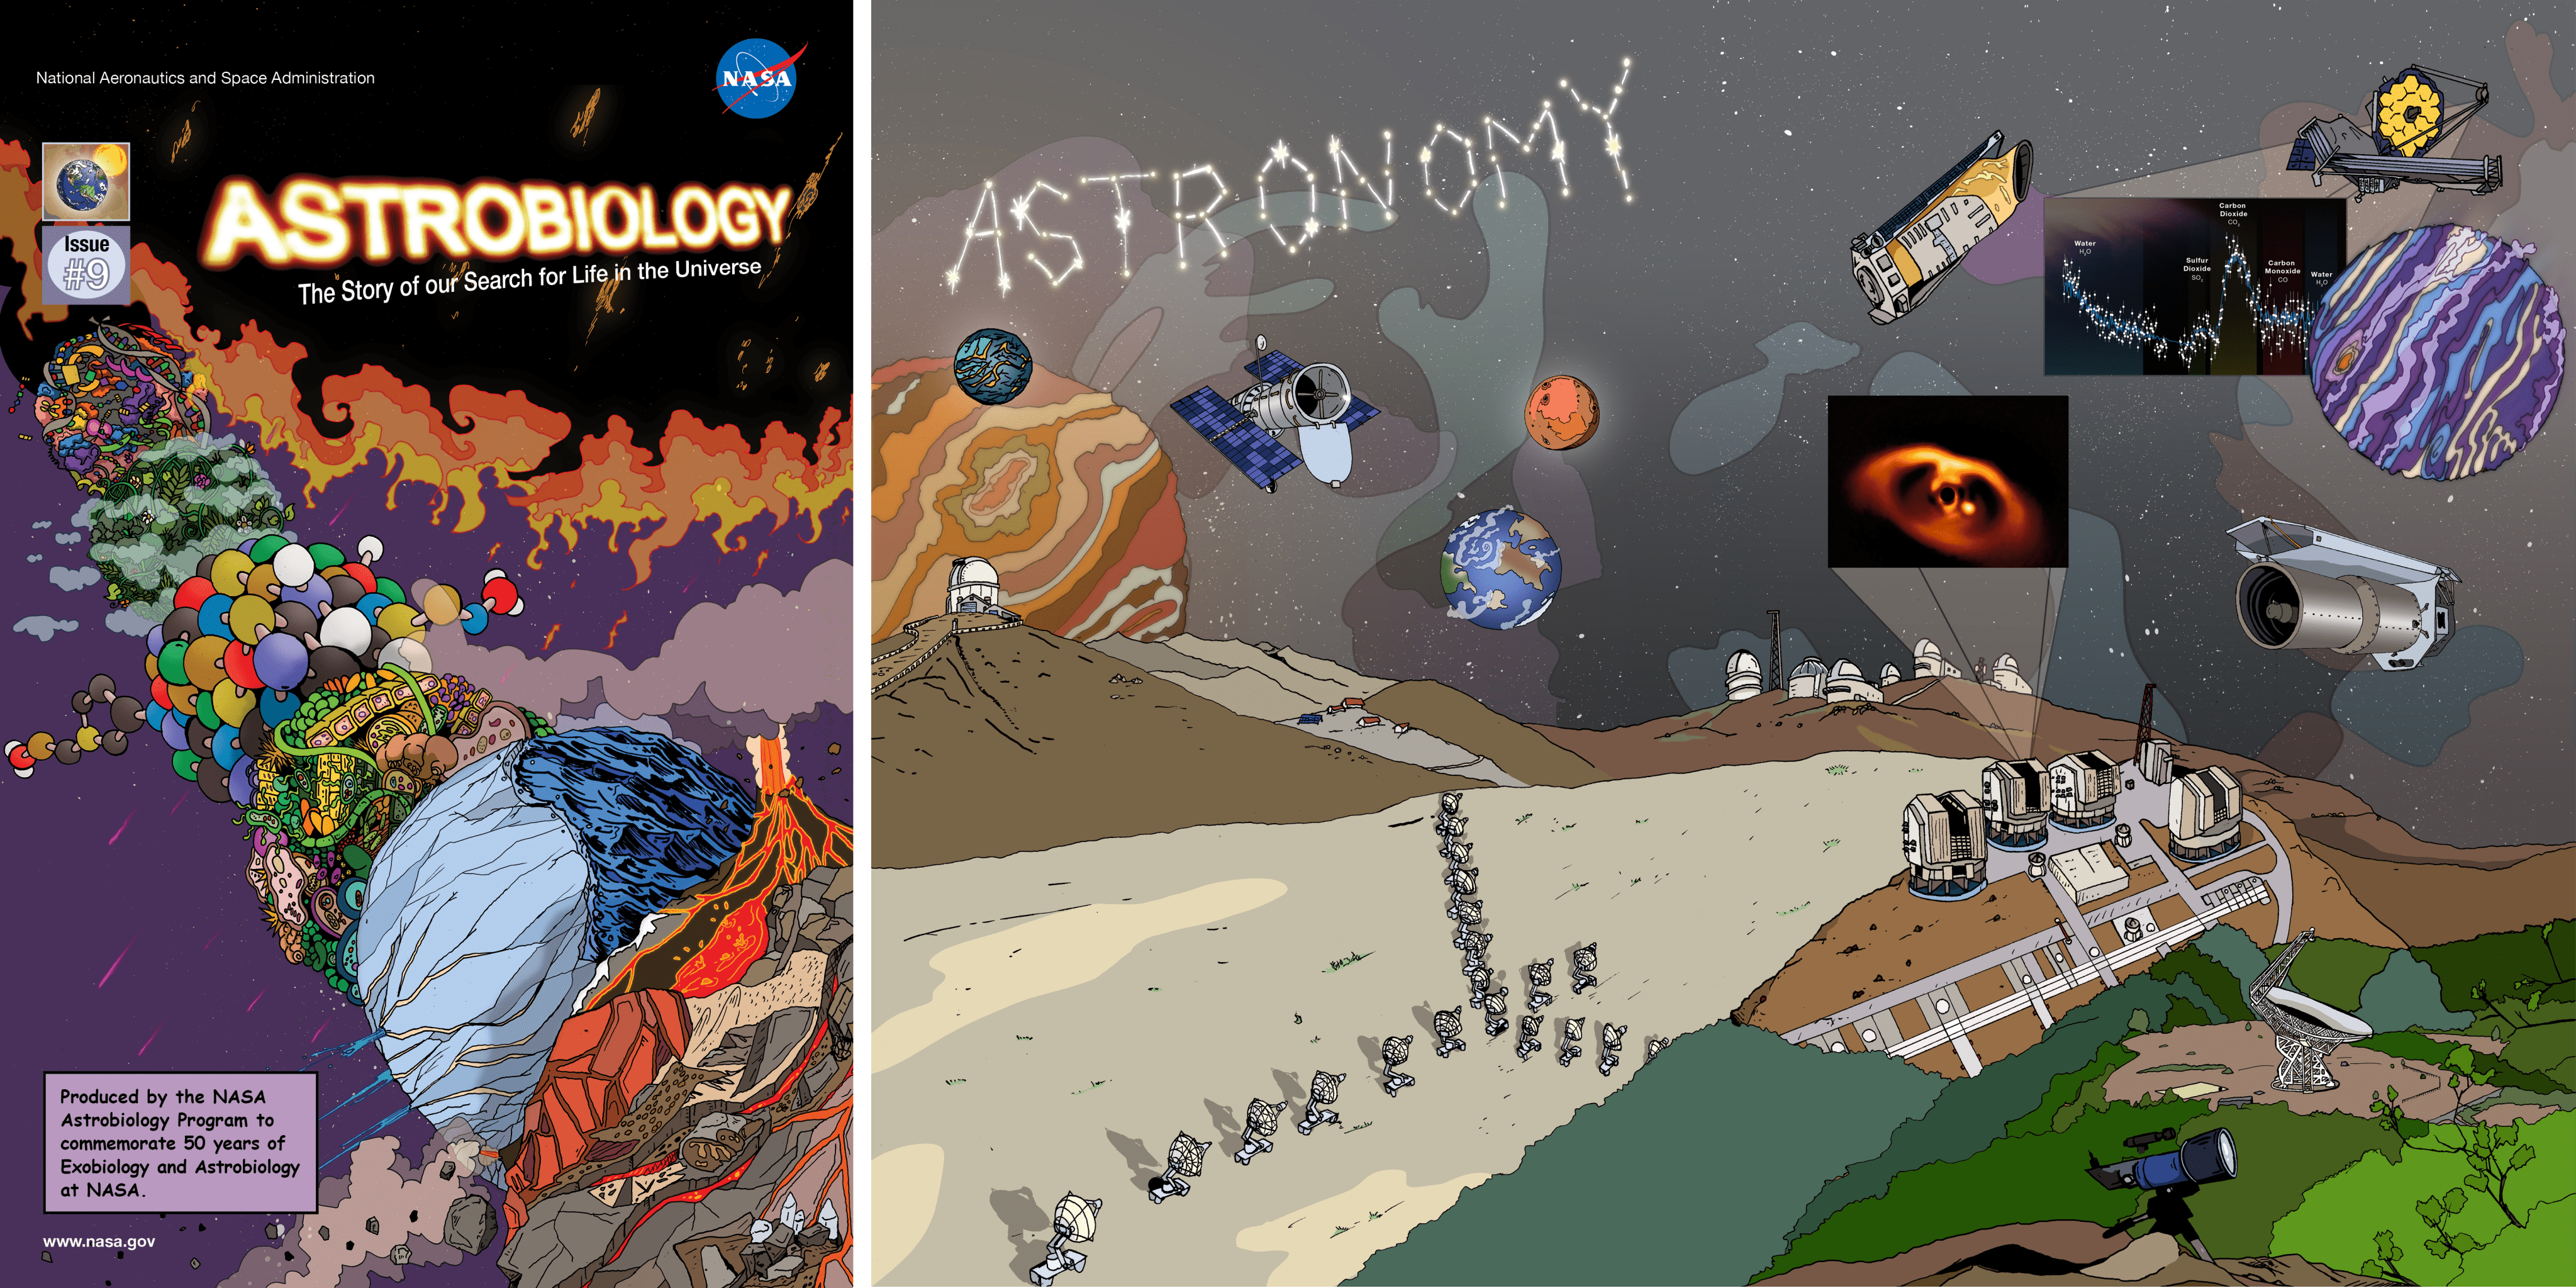 A line of planets leading into the distance, each representing disciplines of astrobiology. The planet in the foreground is rocky with erupting volcanoes. The 2nd planet is a water world, half covered in waves of a global ocean and half covered in ice with plumes of material erupting from between the cracks. The 3rd planet is a sphere of microscopic life with various types of cells in an array of colors, some amoeba-like, some round, some spiked, with microscopic tardigrades crawling around. The 4th planet is a sphere of molecules represented as classroom chemical models with different colored balls connected by sticks. The 5th planet is covered in vines, leaves, and flowers. Wispy clouds shroud it in parts as photosynthesis from the plant life affects the atmospheric composition. The final planet in the background is a ball of molecules used in cells, such as DNA, RNA, and proteins. The title at the top reads, Astrobiology: The Story of our Search for Life in the Universe. Issue #9.